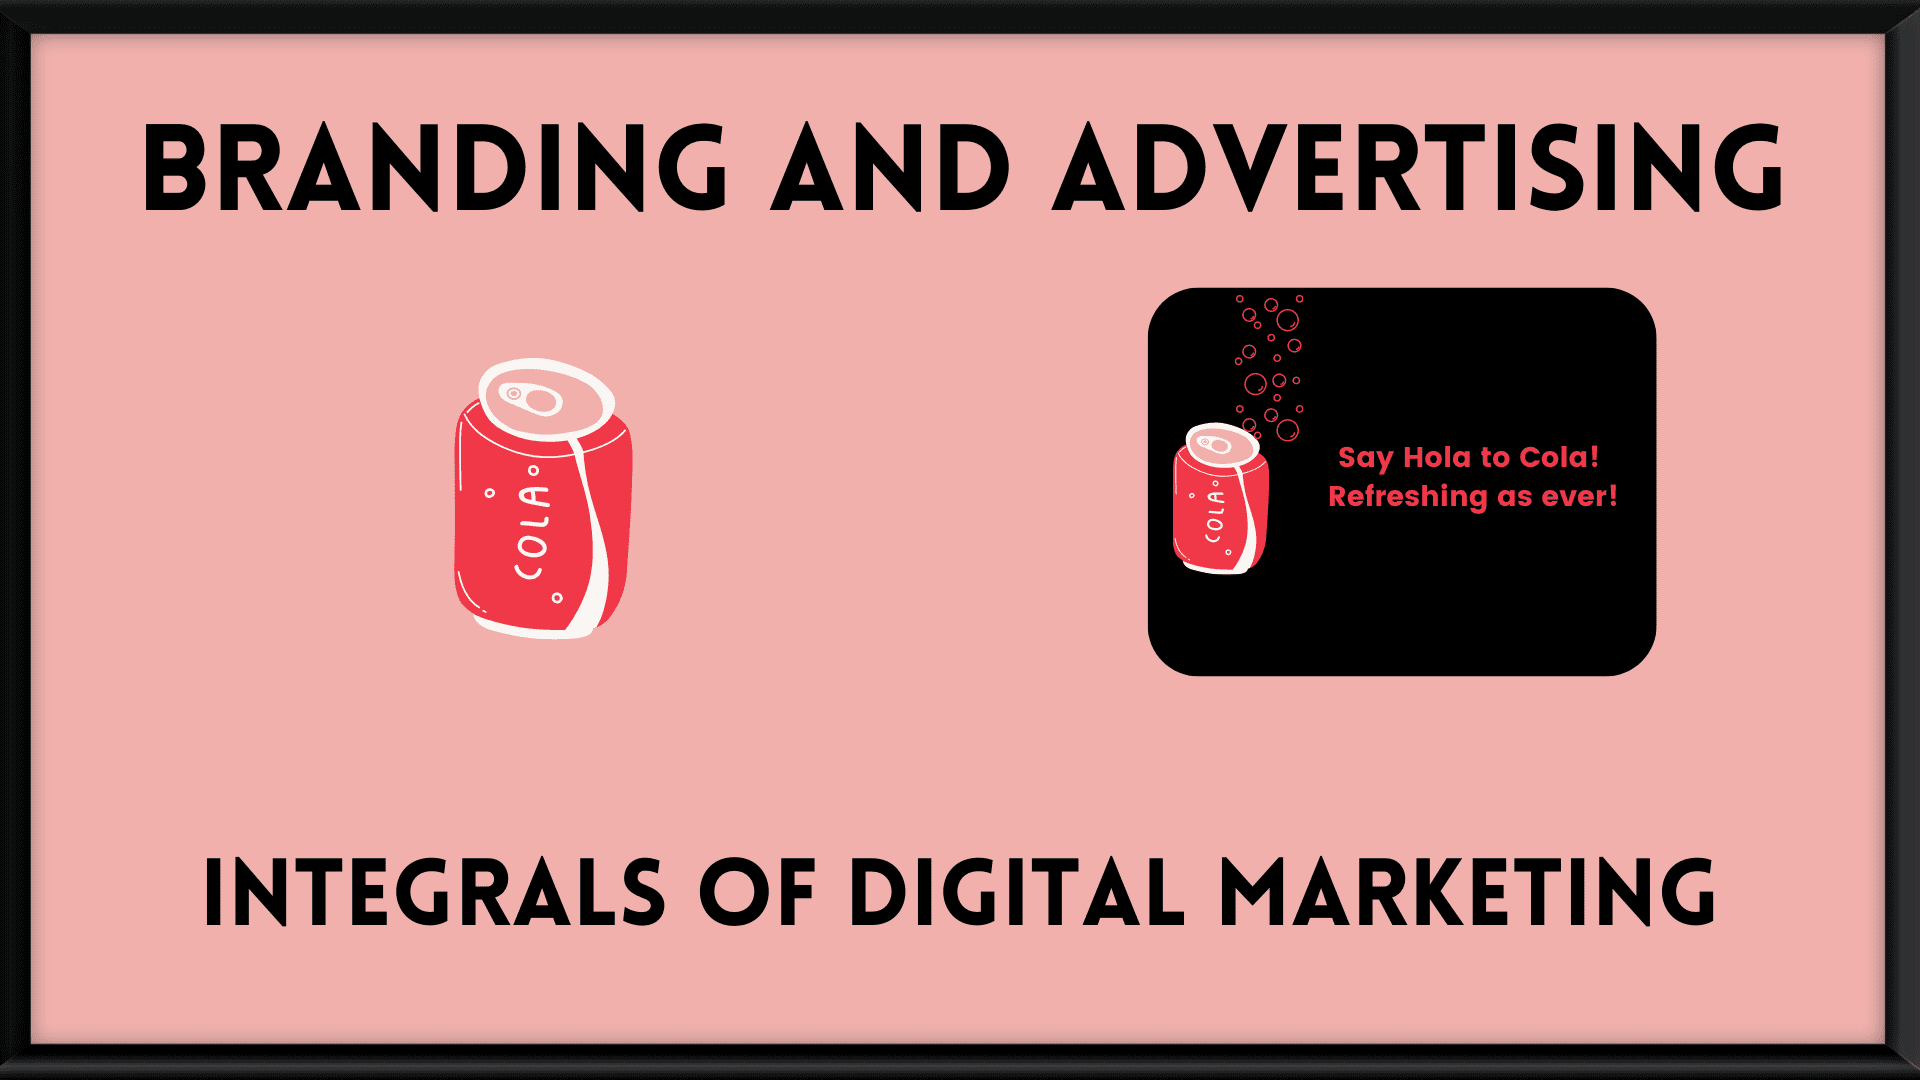 branding and advertising as an integral part of digital marketing